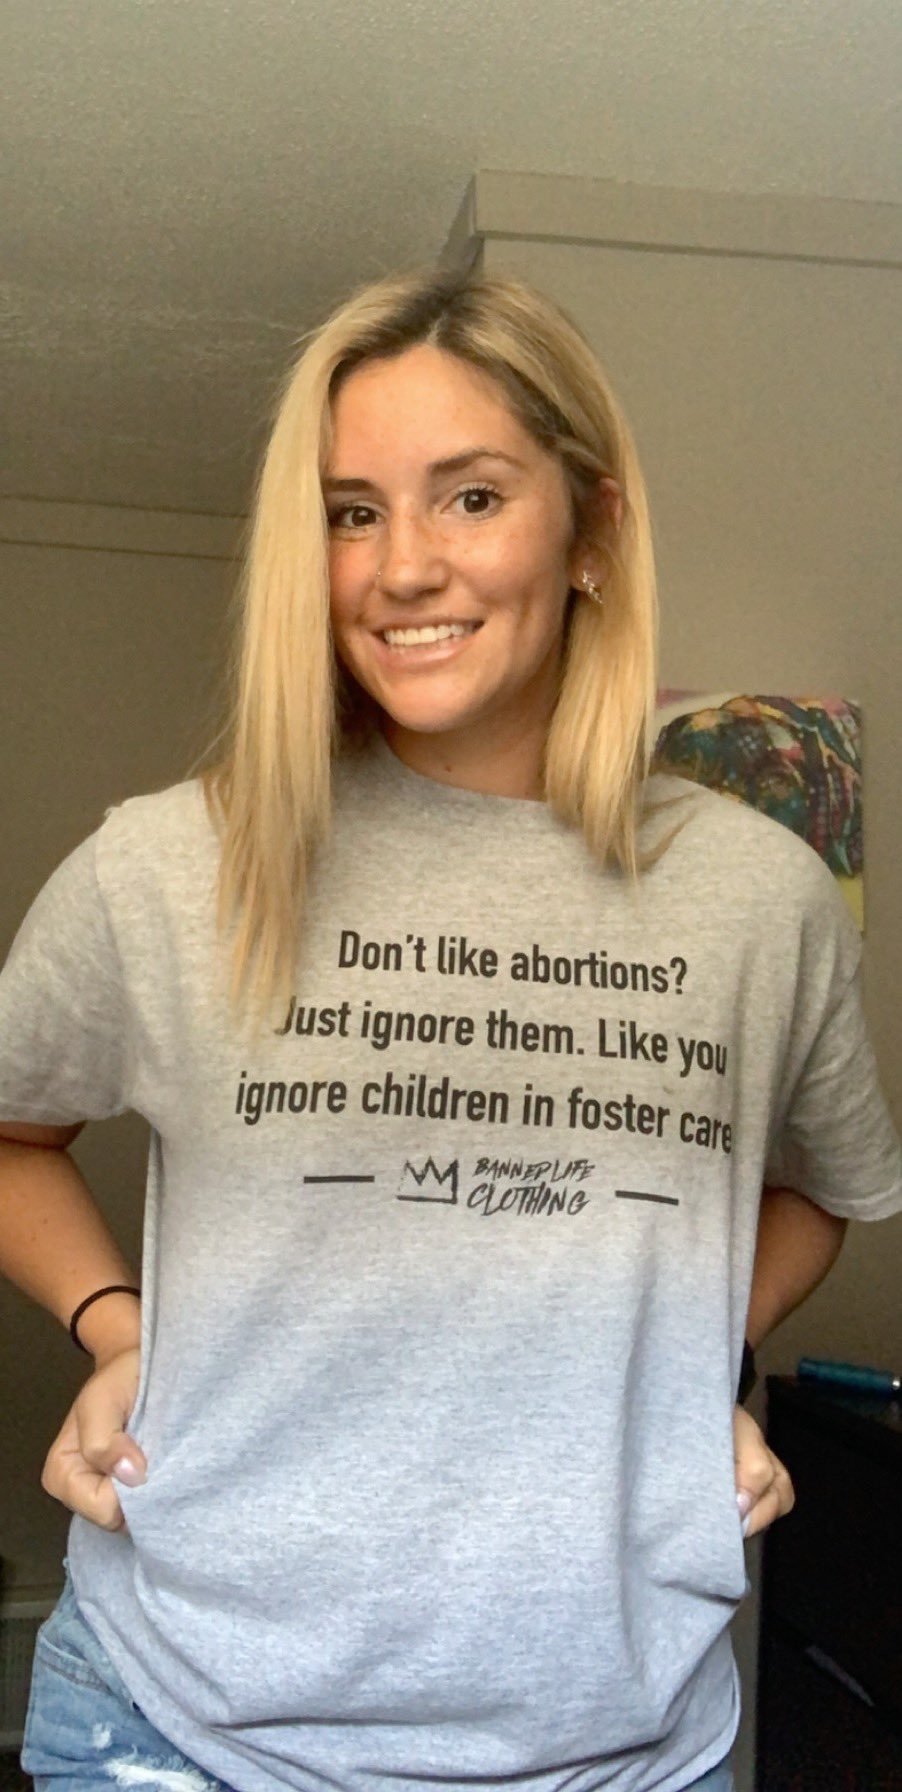 Don’t like abortions? Just ignore them like you ignore children in foster care. 